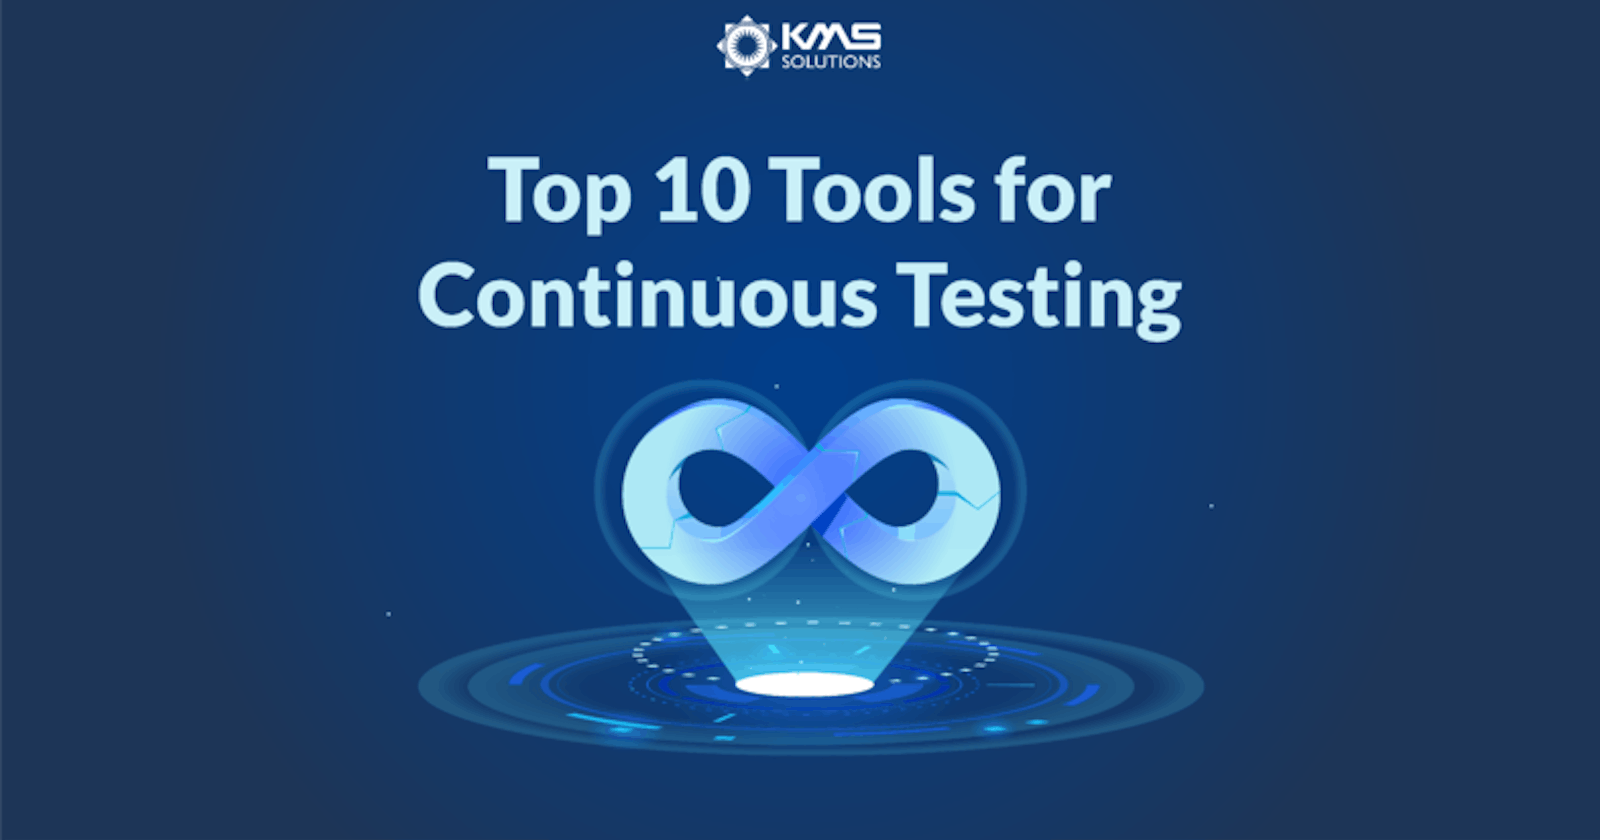 Top 10 Tools for Continuous Testing